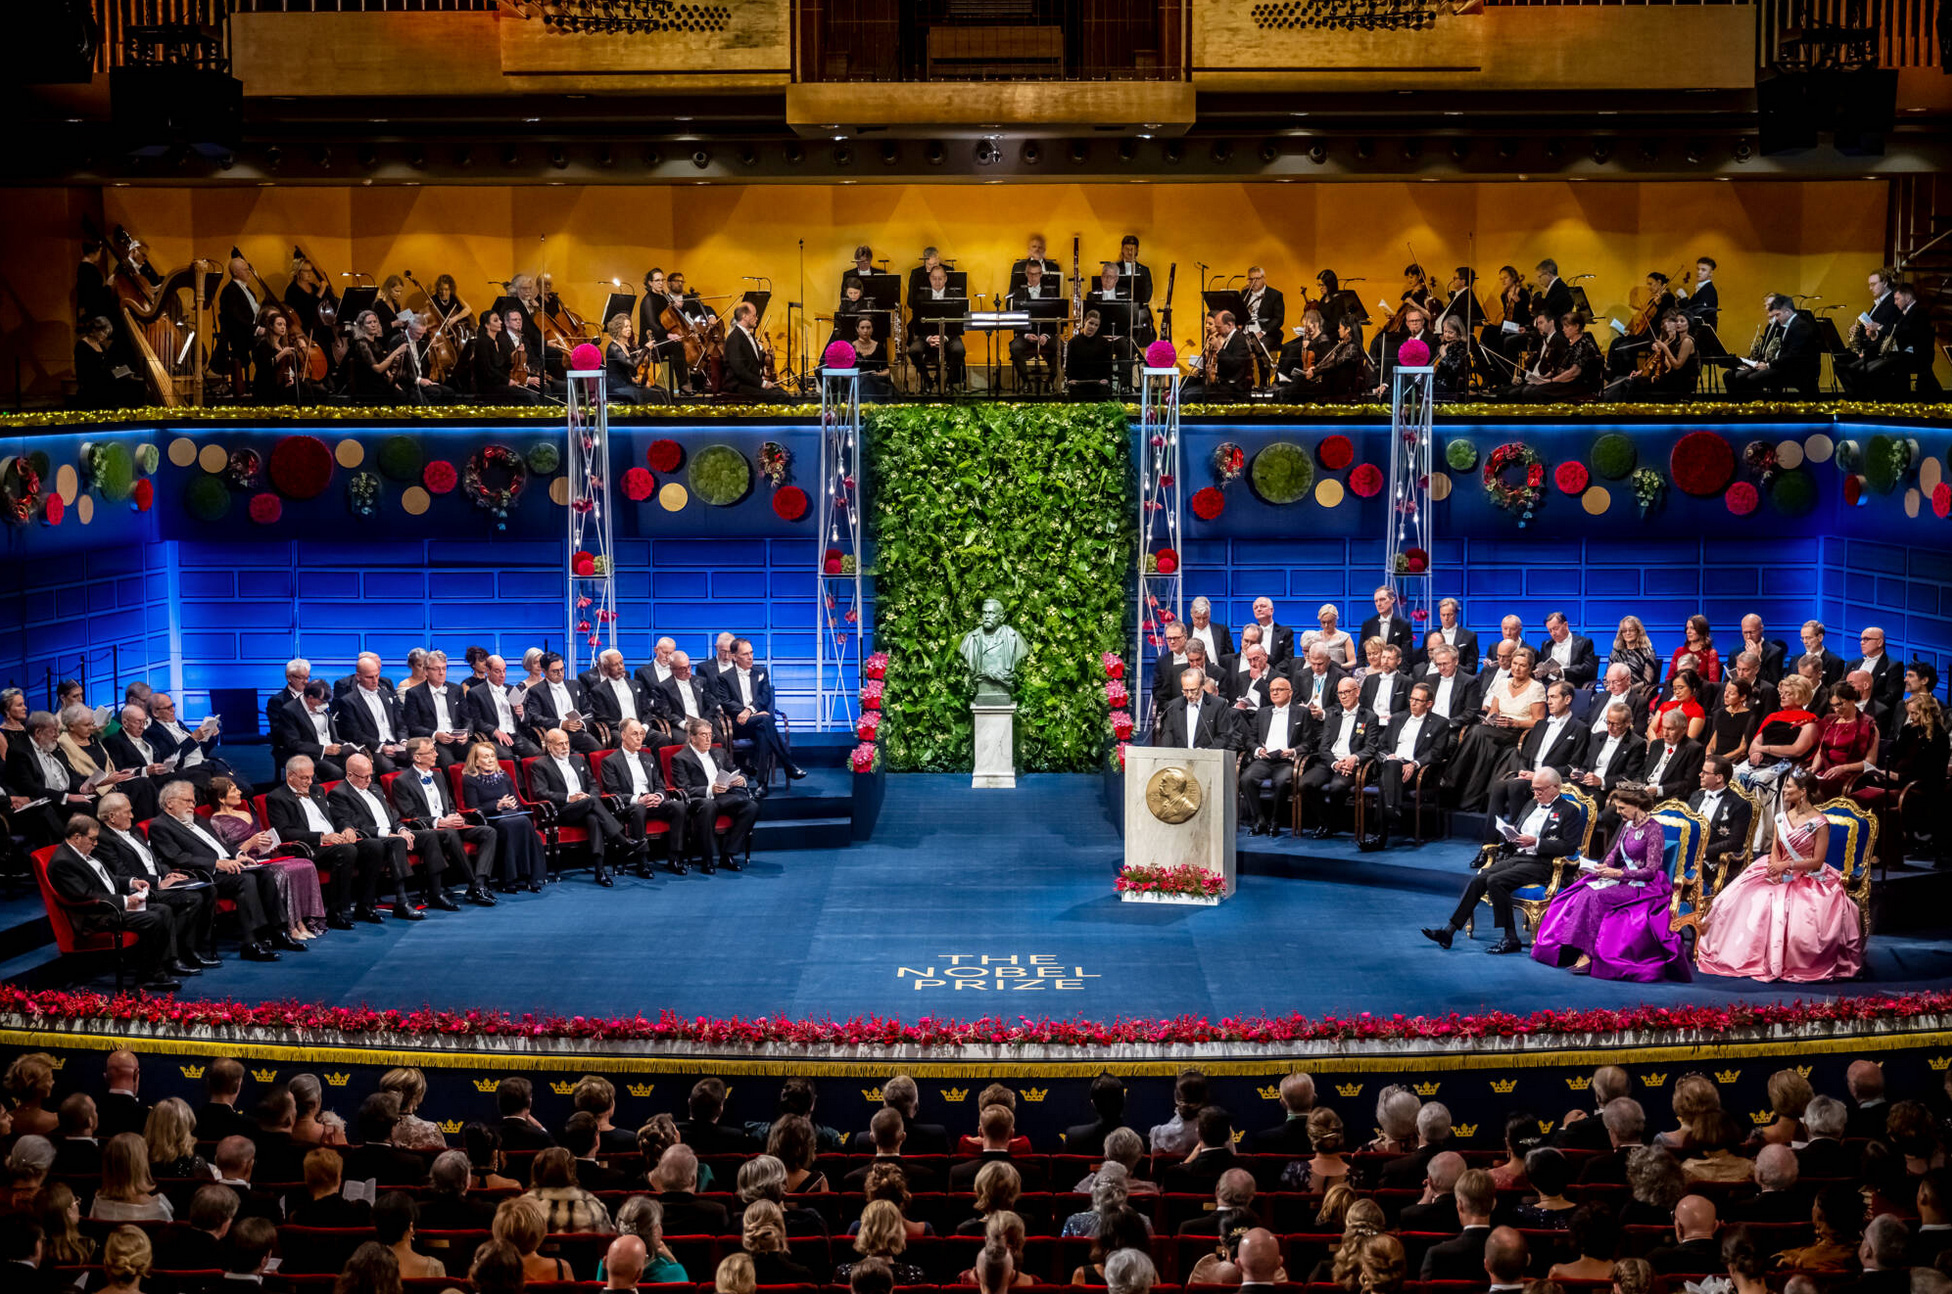 The Nobel Prize award ceremony at the Konserthuset in Stockholm honored winners of the 2022, 2021, and 2020 prizes.